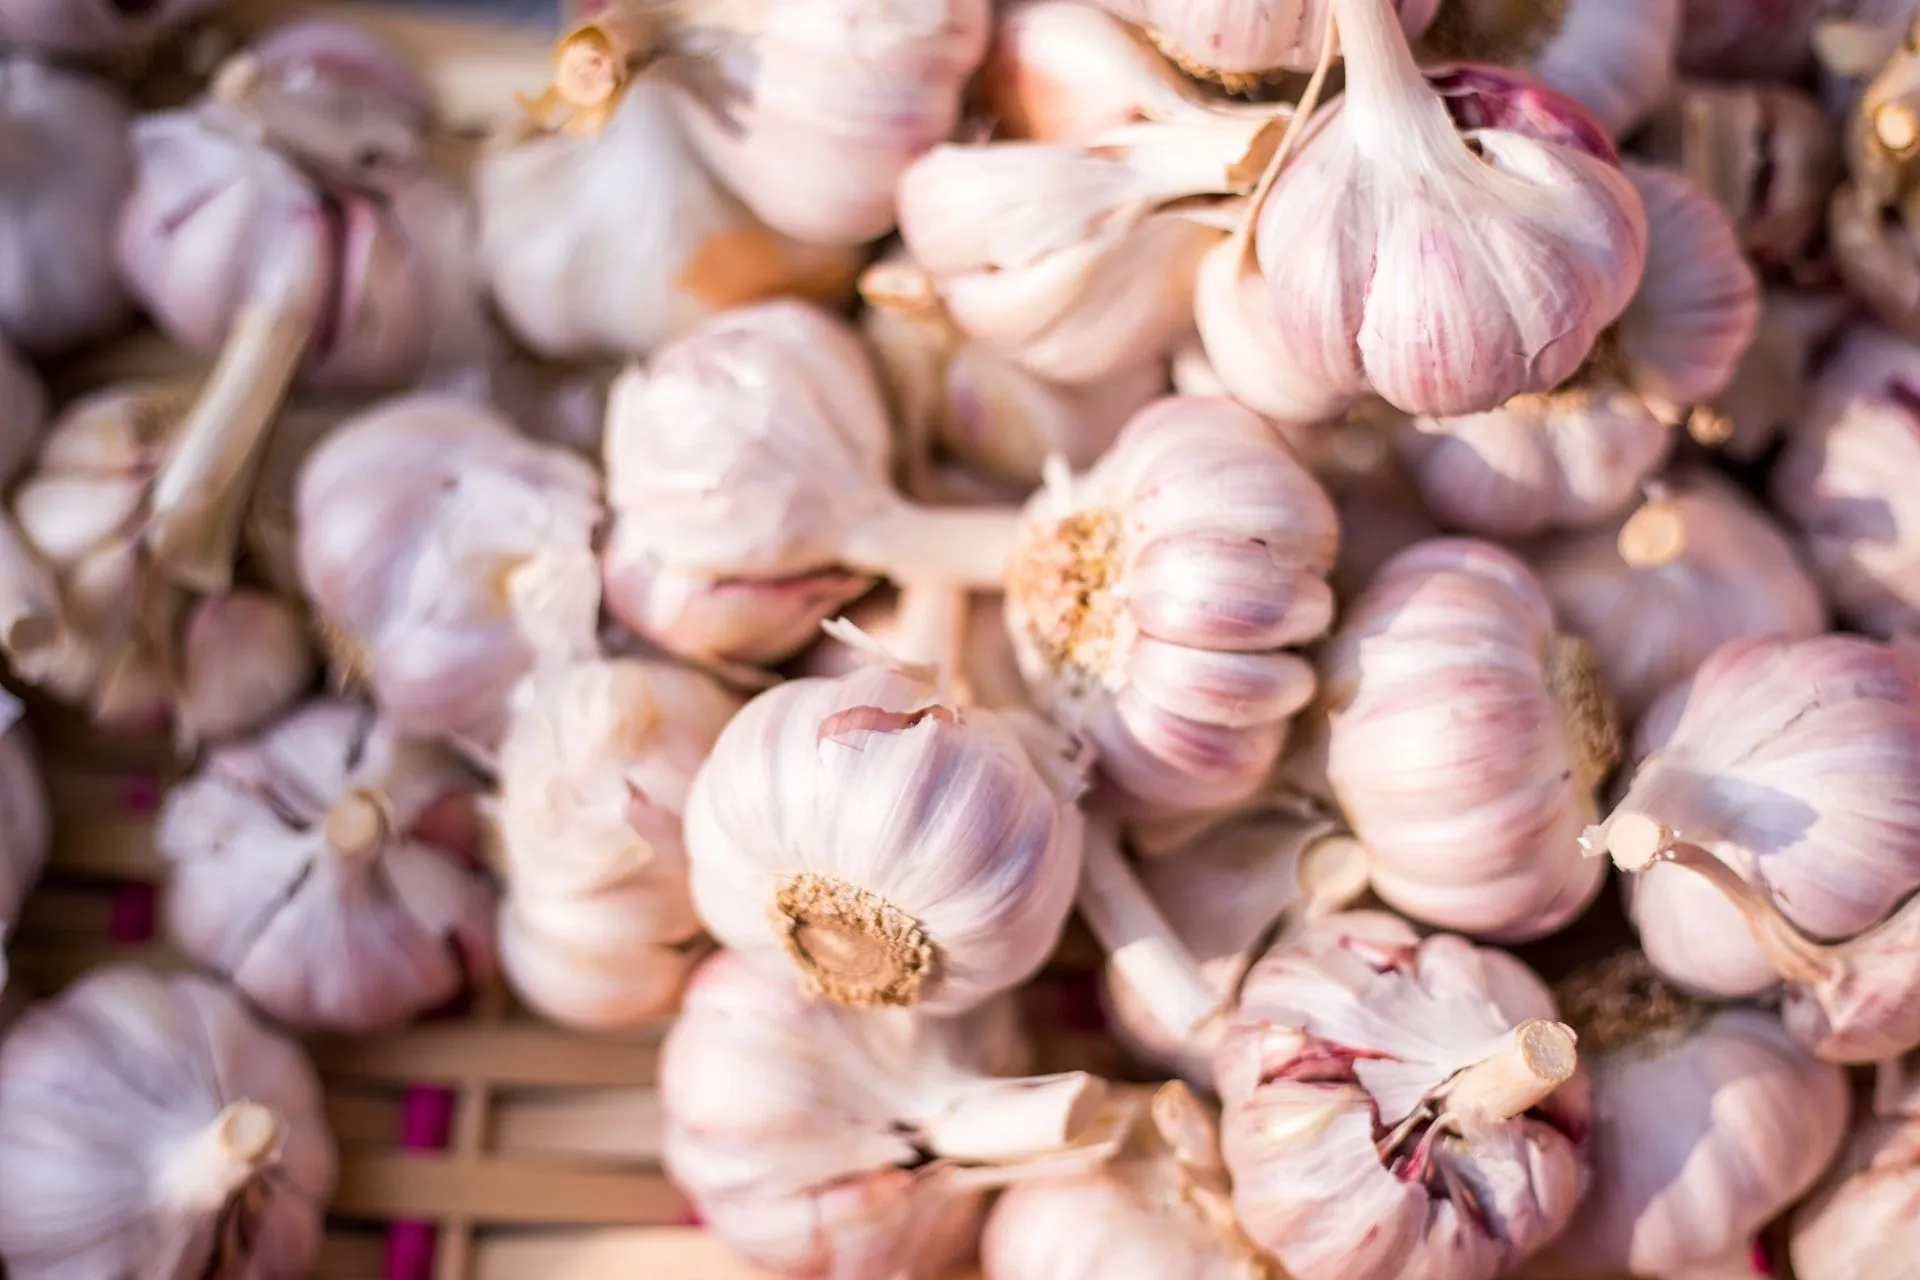 The scientific name of garlic is Allium sativum, a part of the Onion family known as Alliaceae.